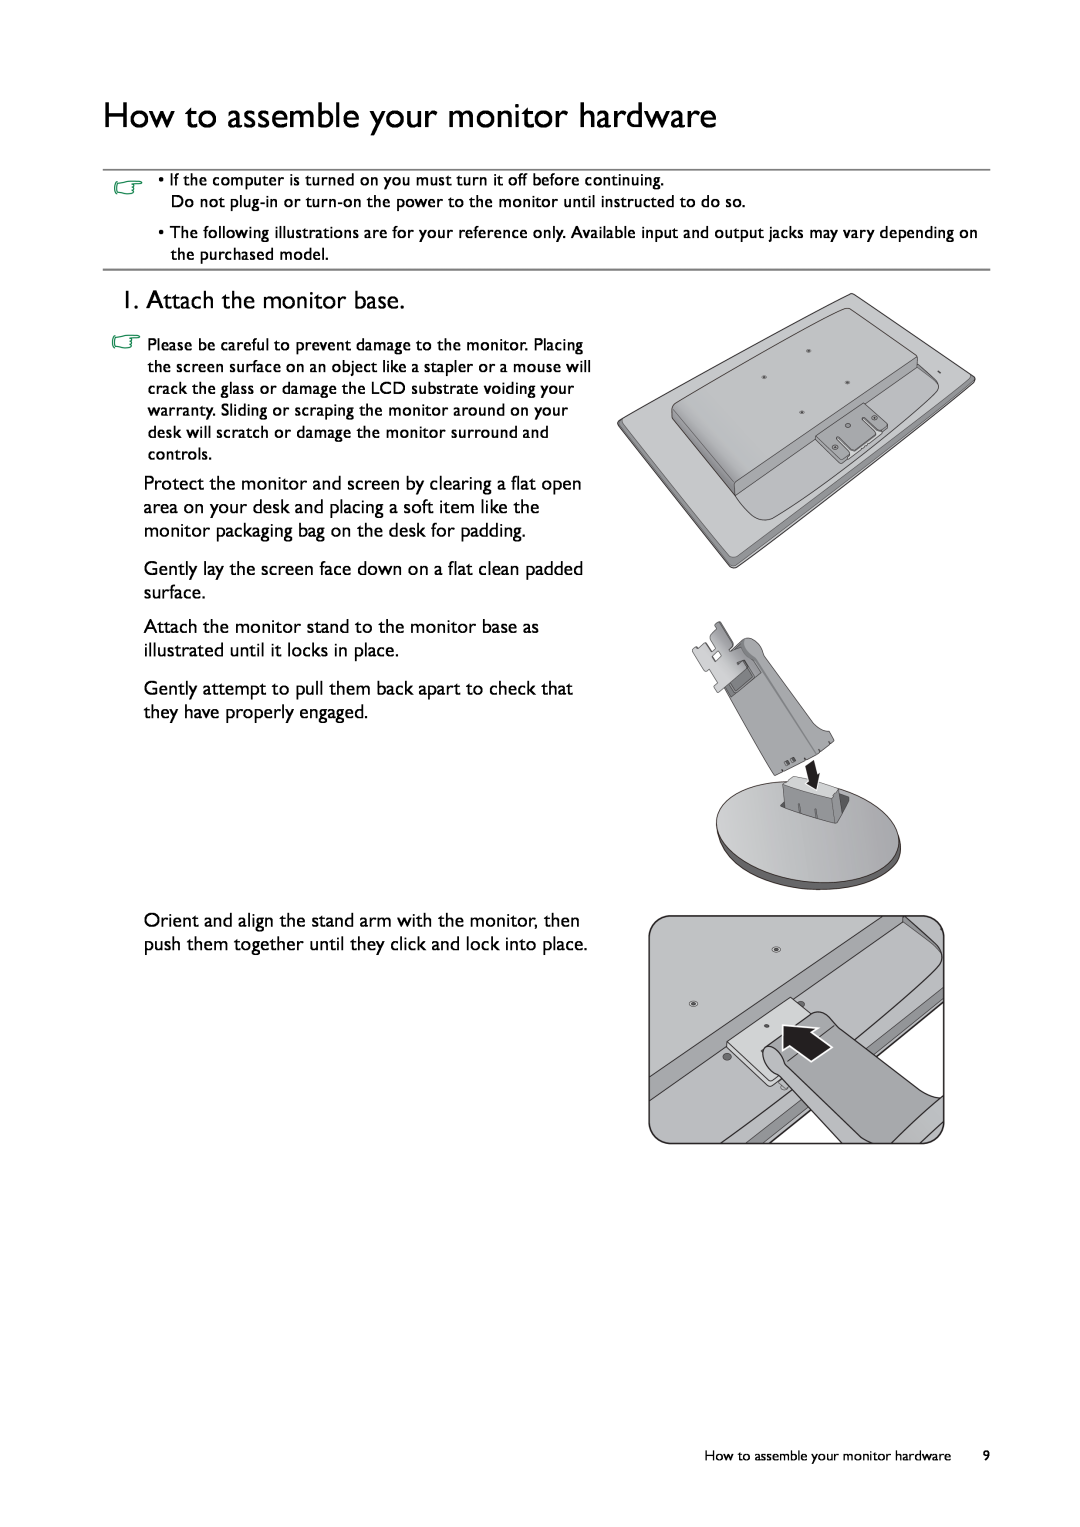 BenQ GW2750HM, GW2255, GW2450 user manual How to assemble your monitor hardware, Attach the monitor base 